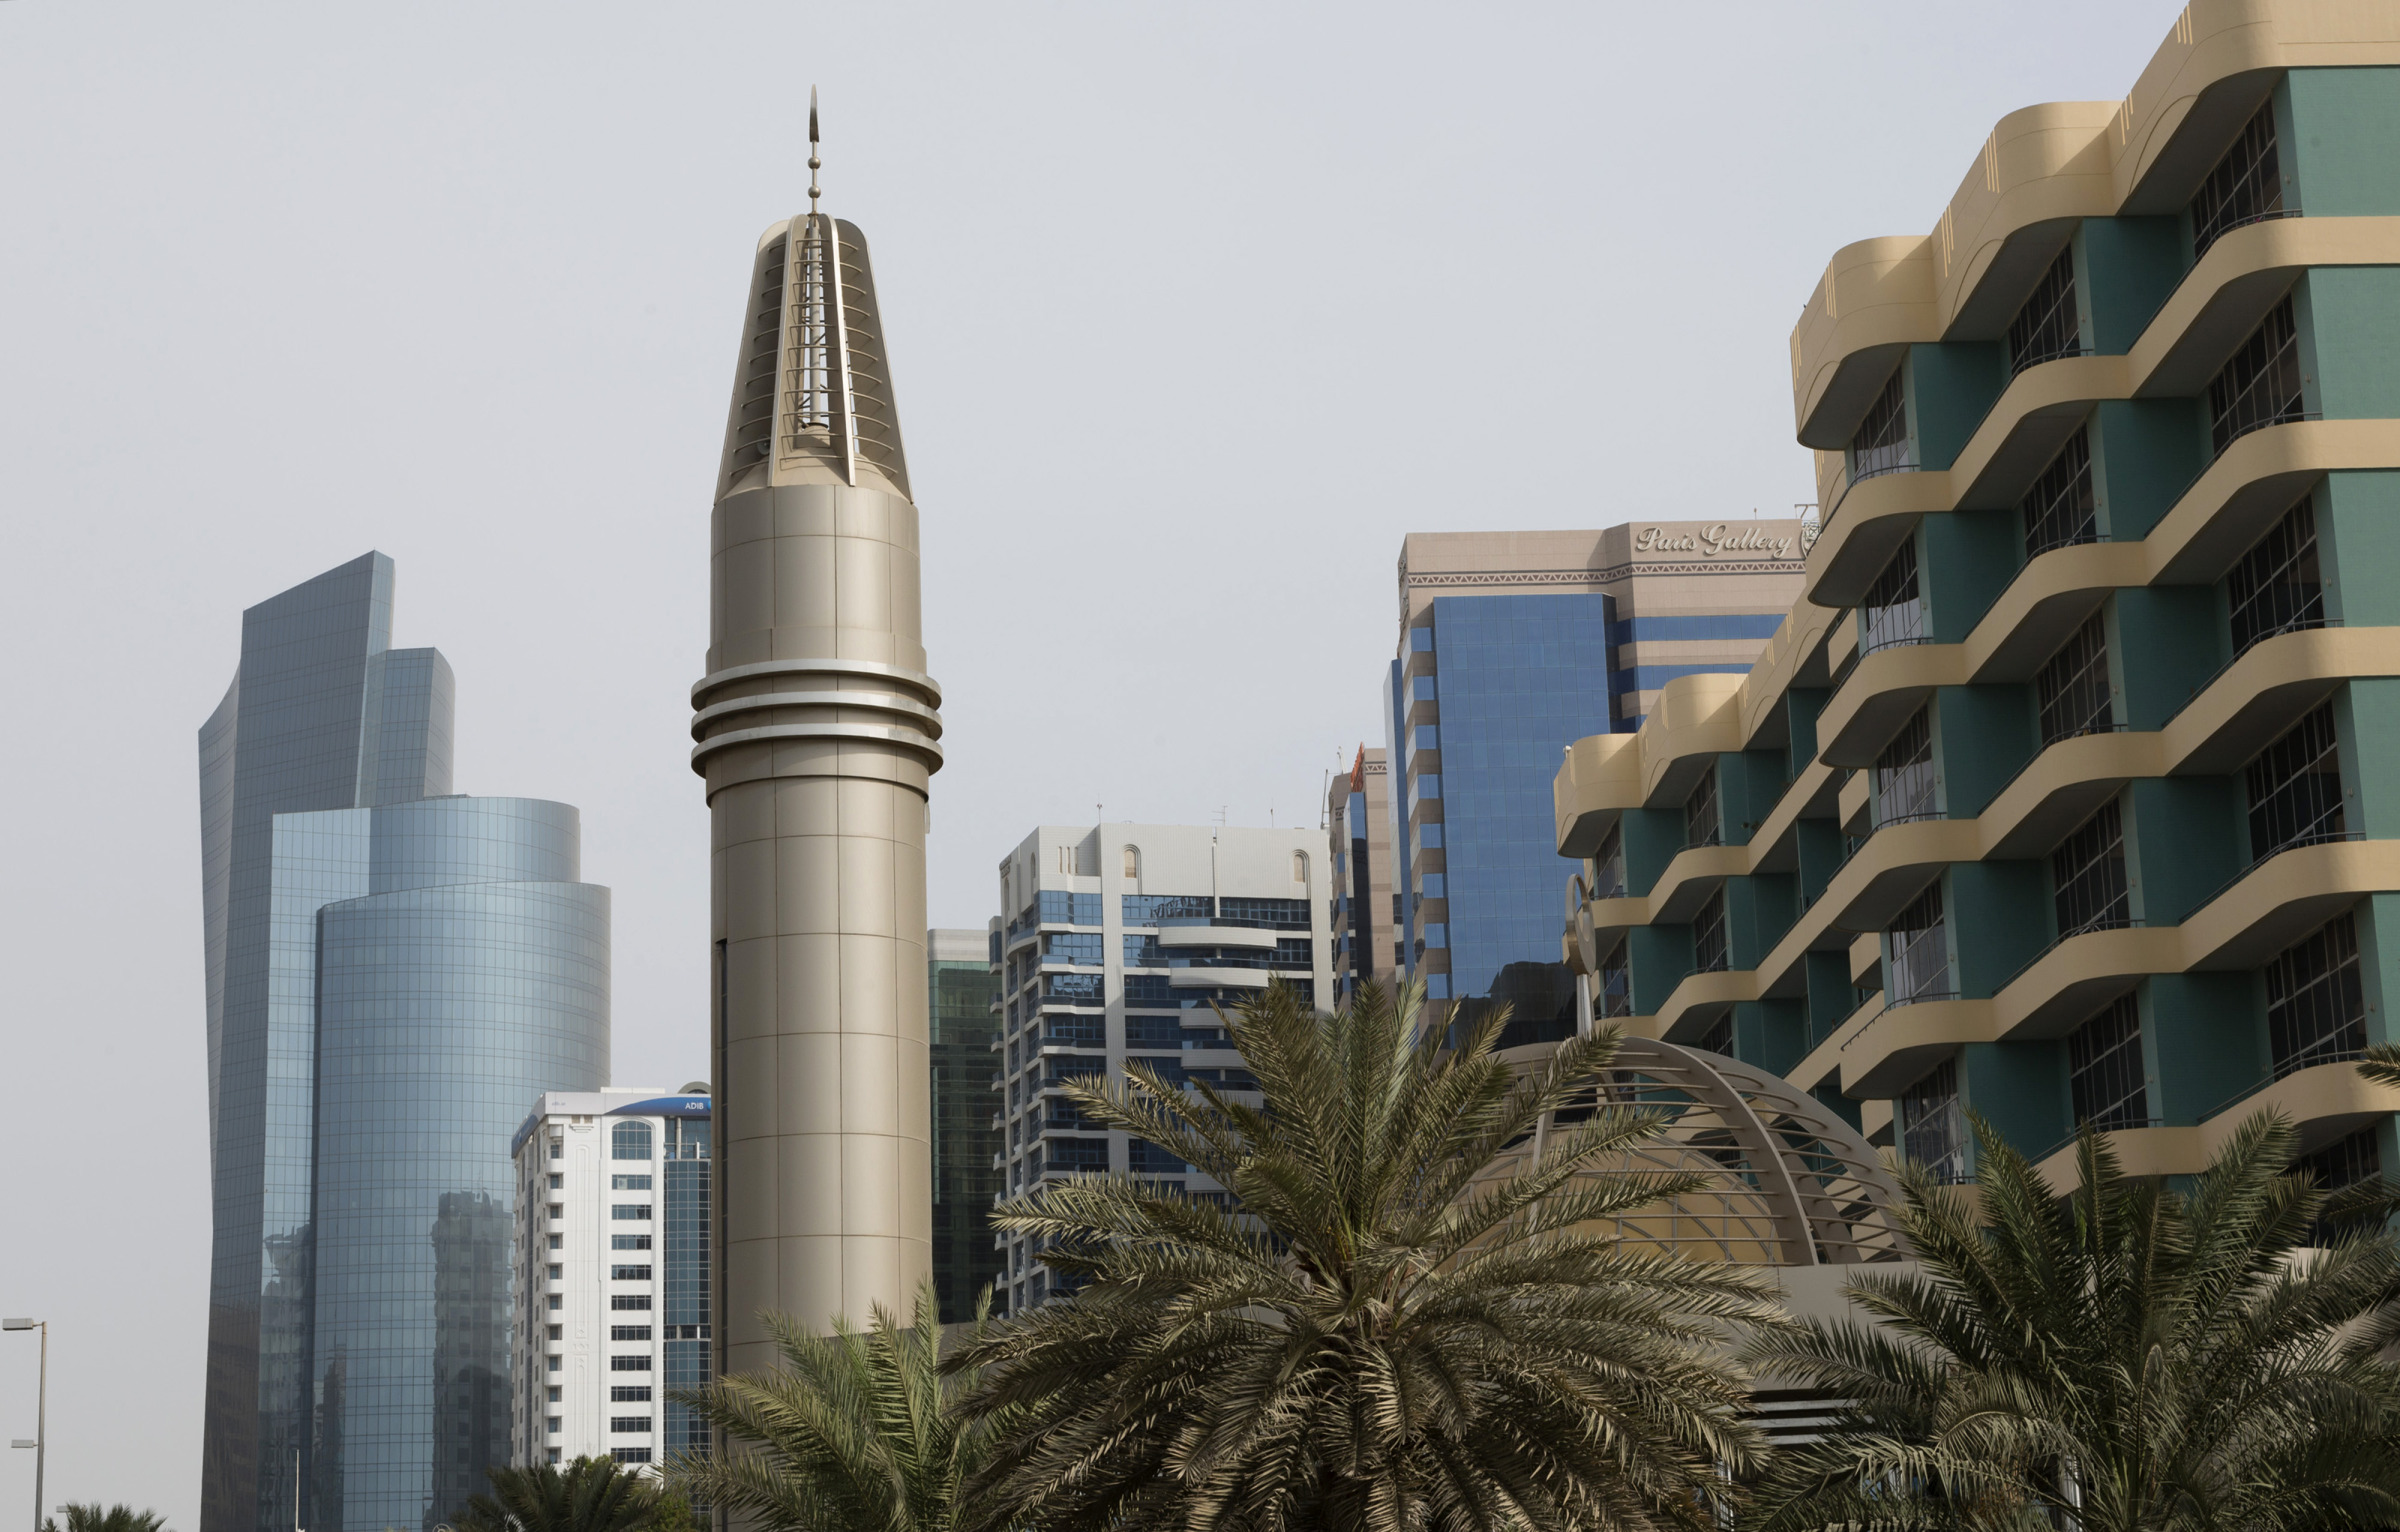 Buildings stand in the city skyline in Abu Dhabi, United Arab Emirates.